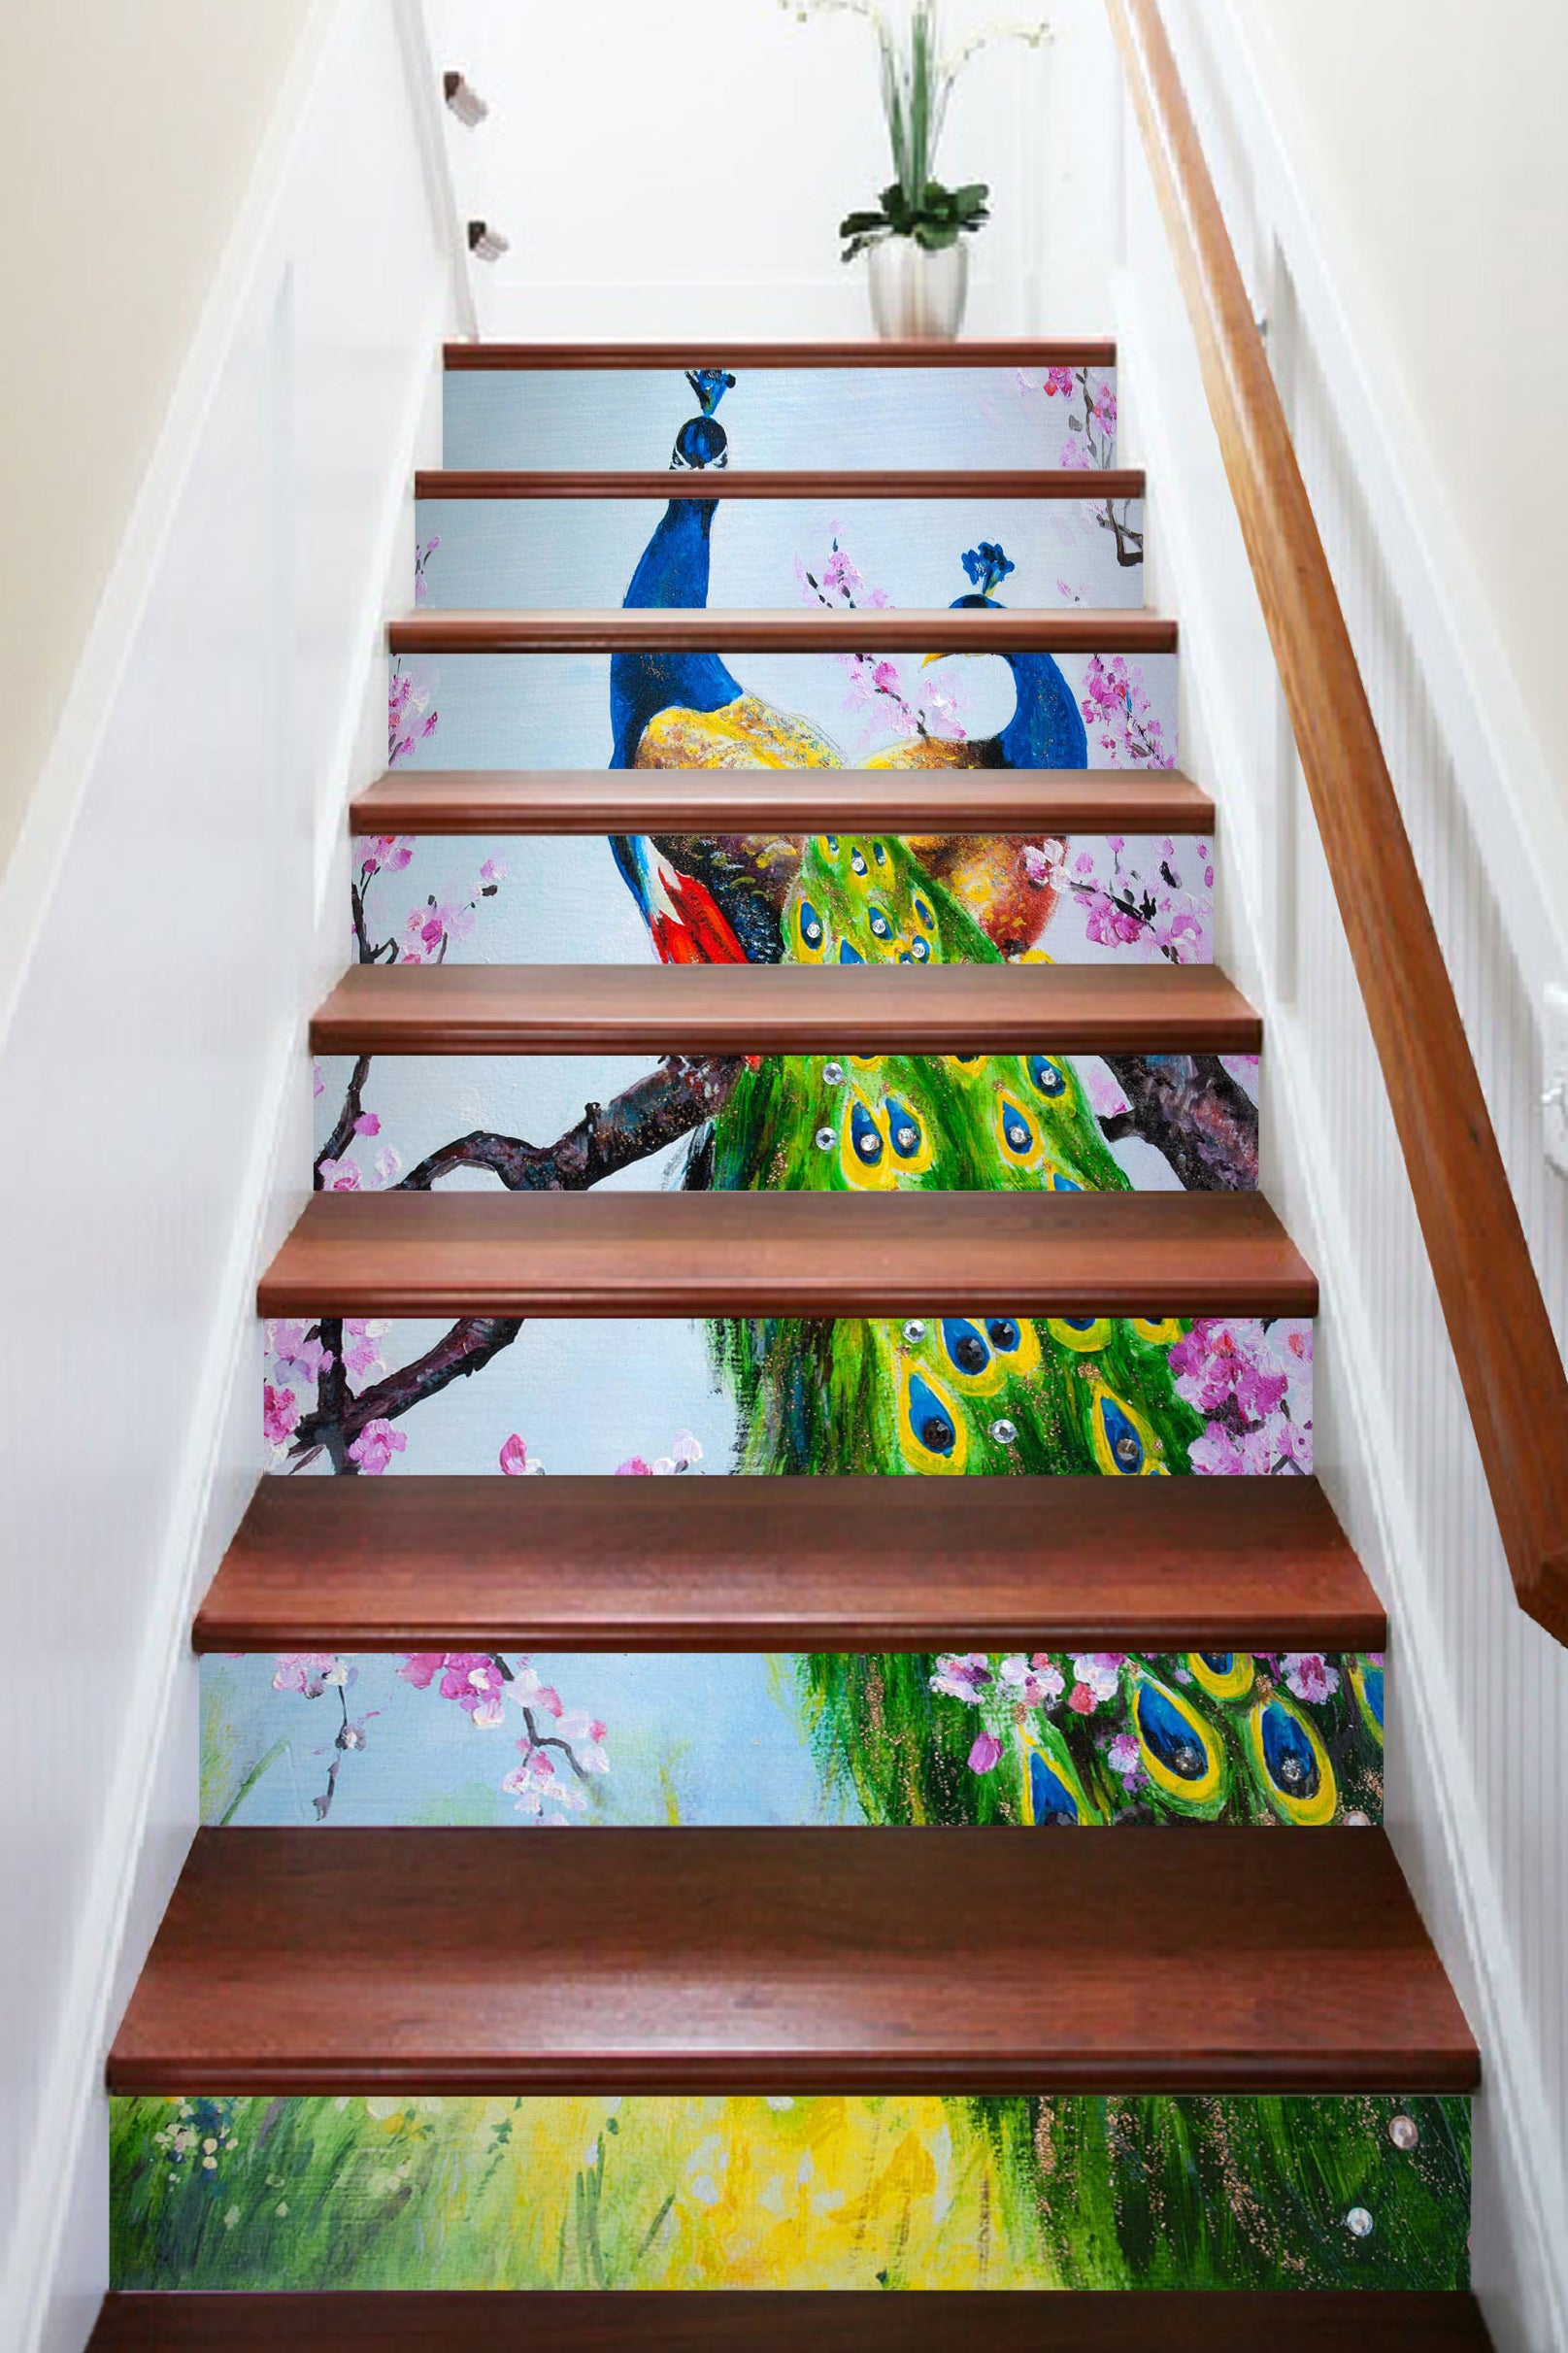 3D Affectionate And Gorgeous Peacock 430 Stair Risers